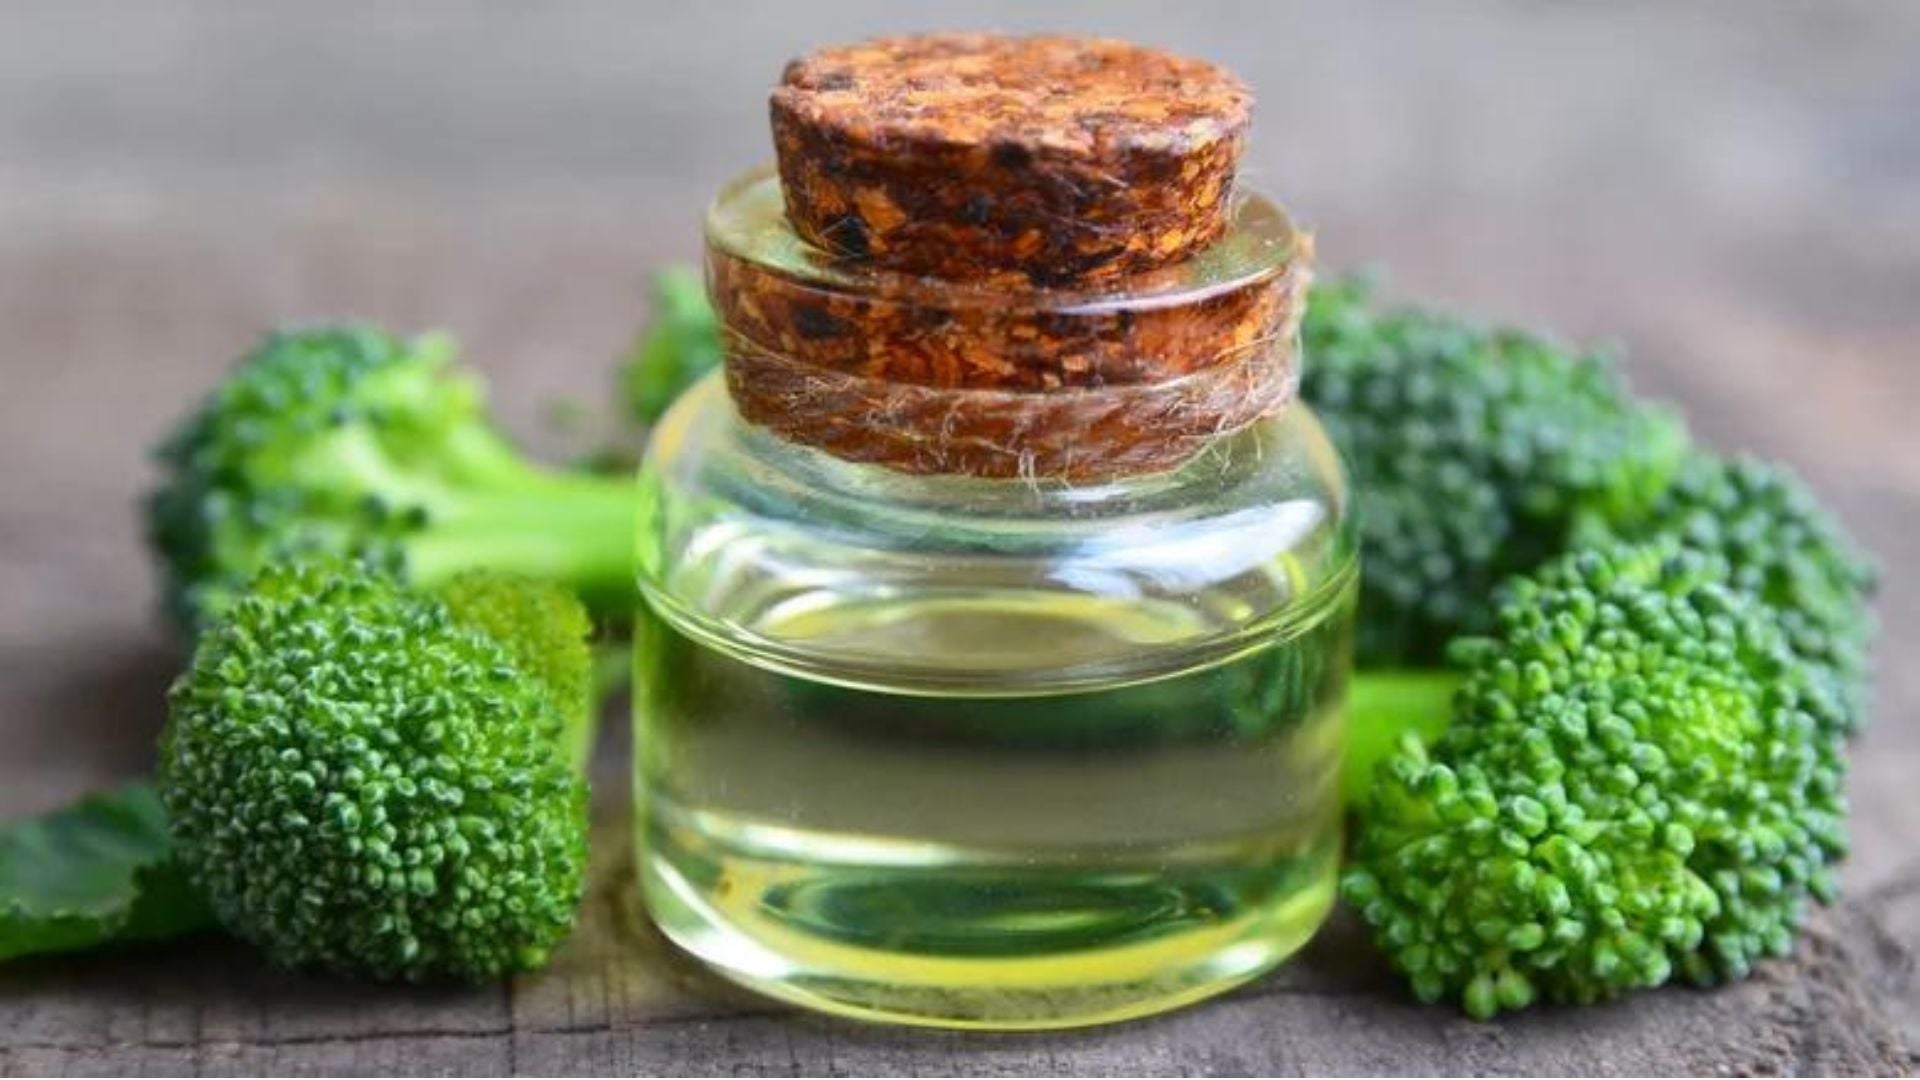 broccoli seed oil sourced from broccoli